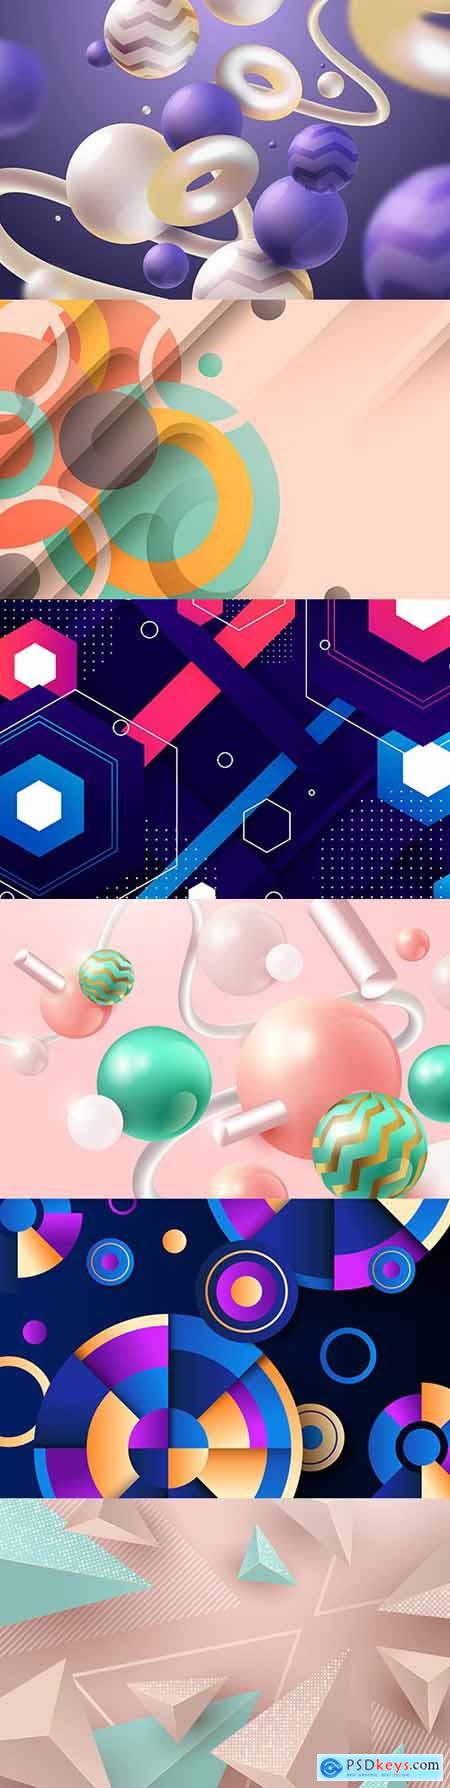 Abstract background with geometric shapes and spheres